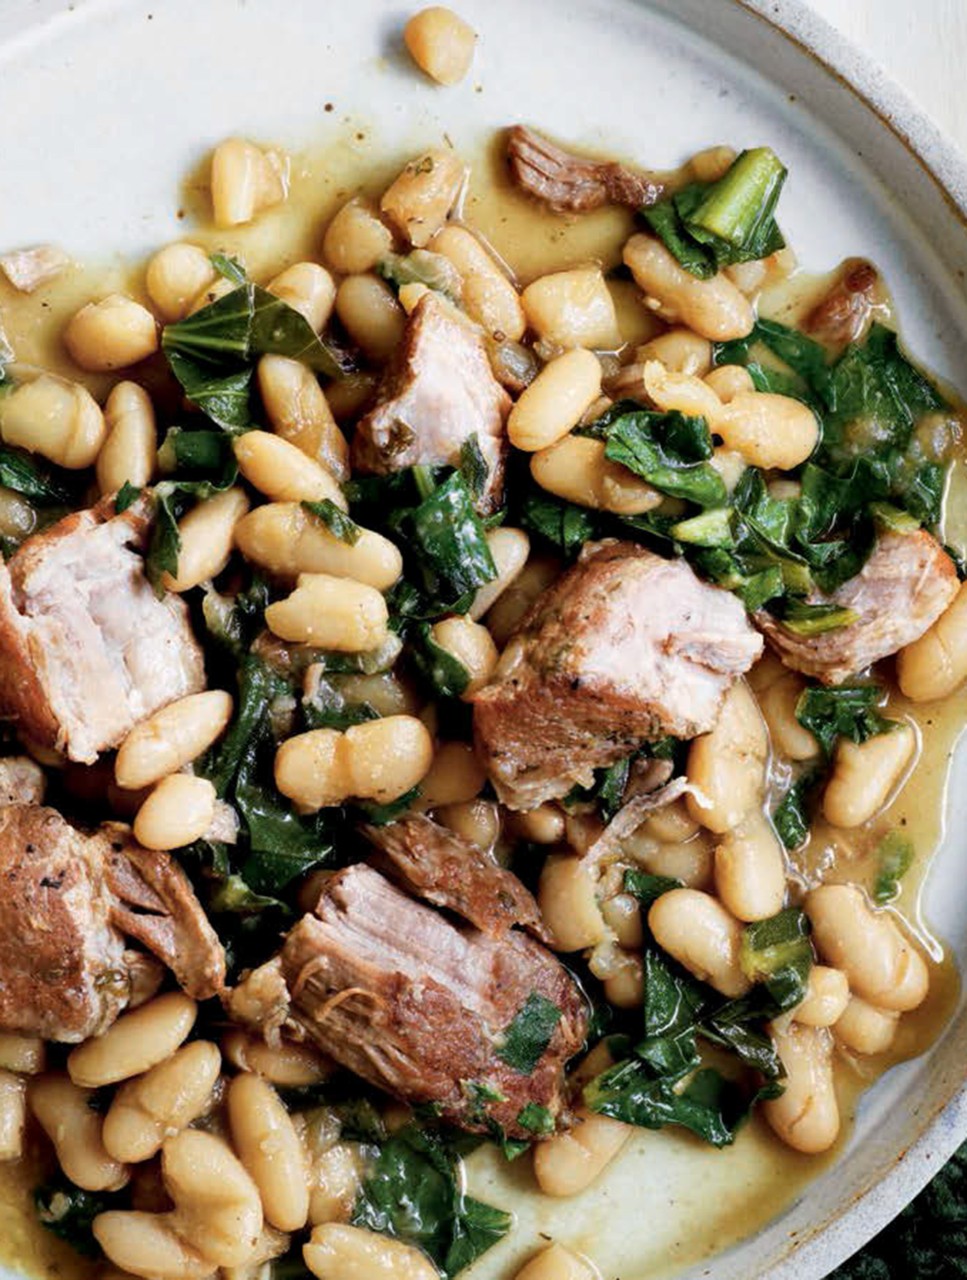 Italian Cannellini Beans with Braised Pork Shoulder & Bitter Greens